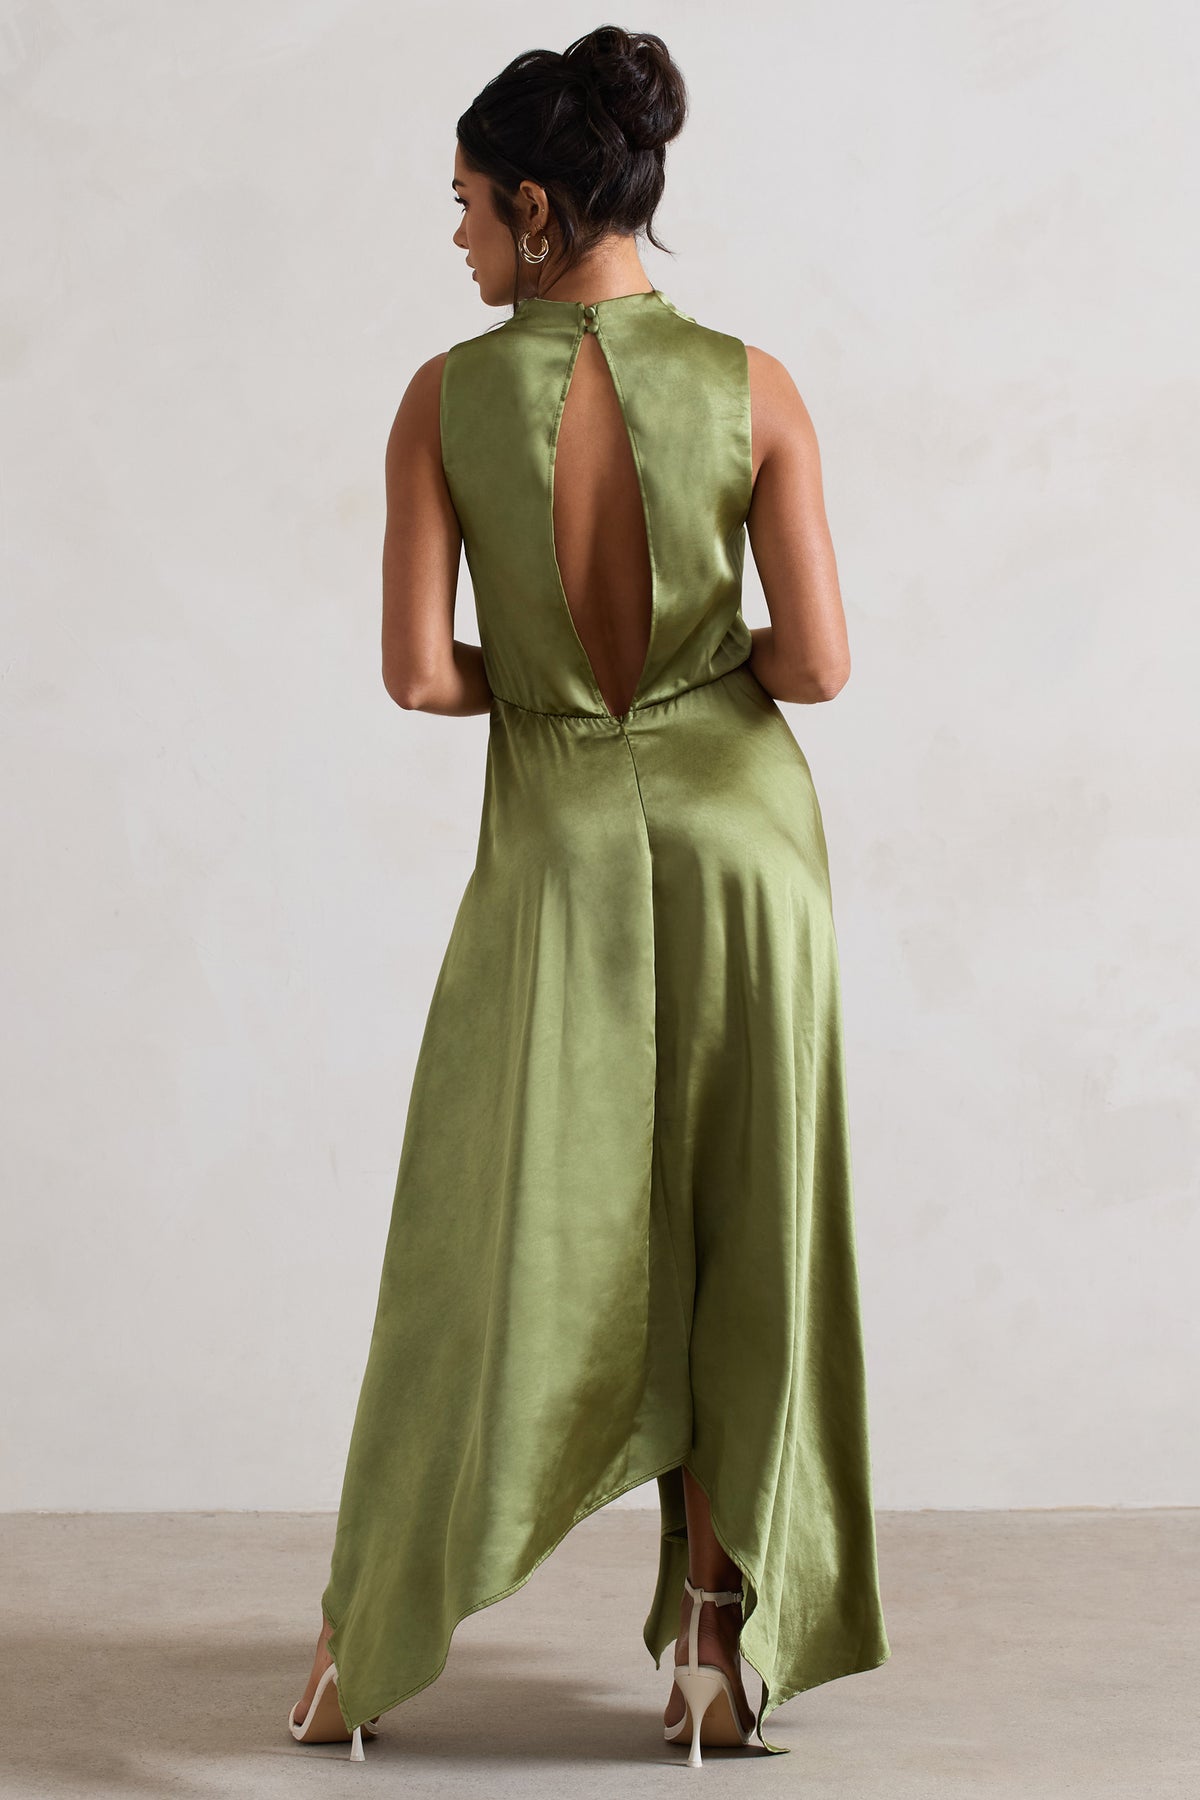 Lifetime Olive Satin Cowl Neck Maxi Dress With Cross Back Detail